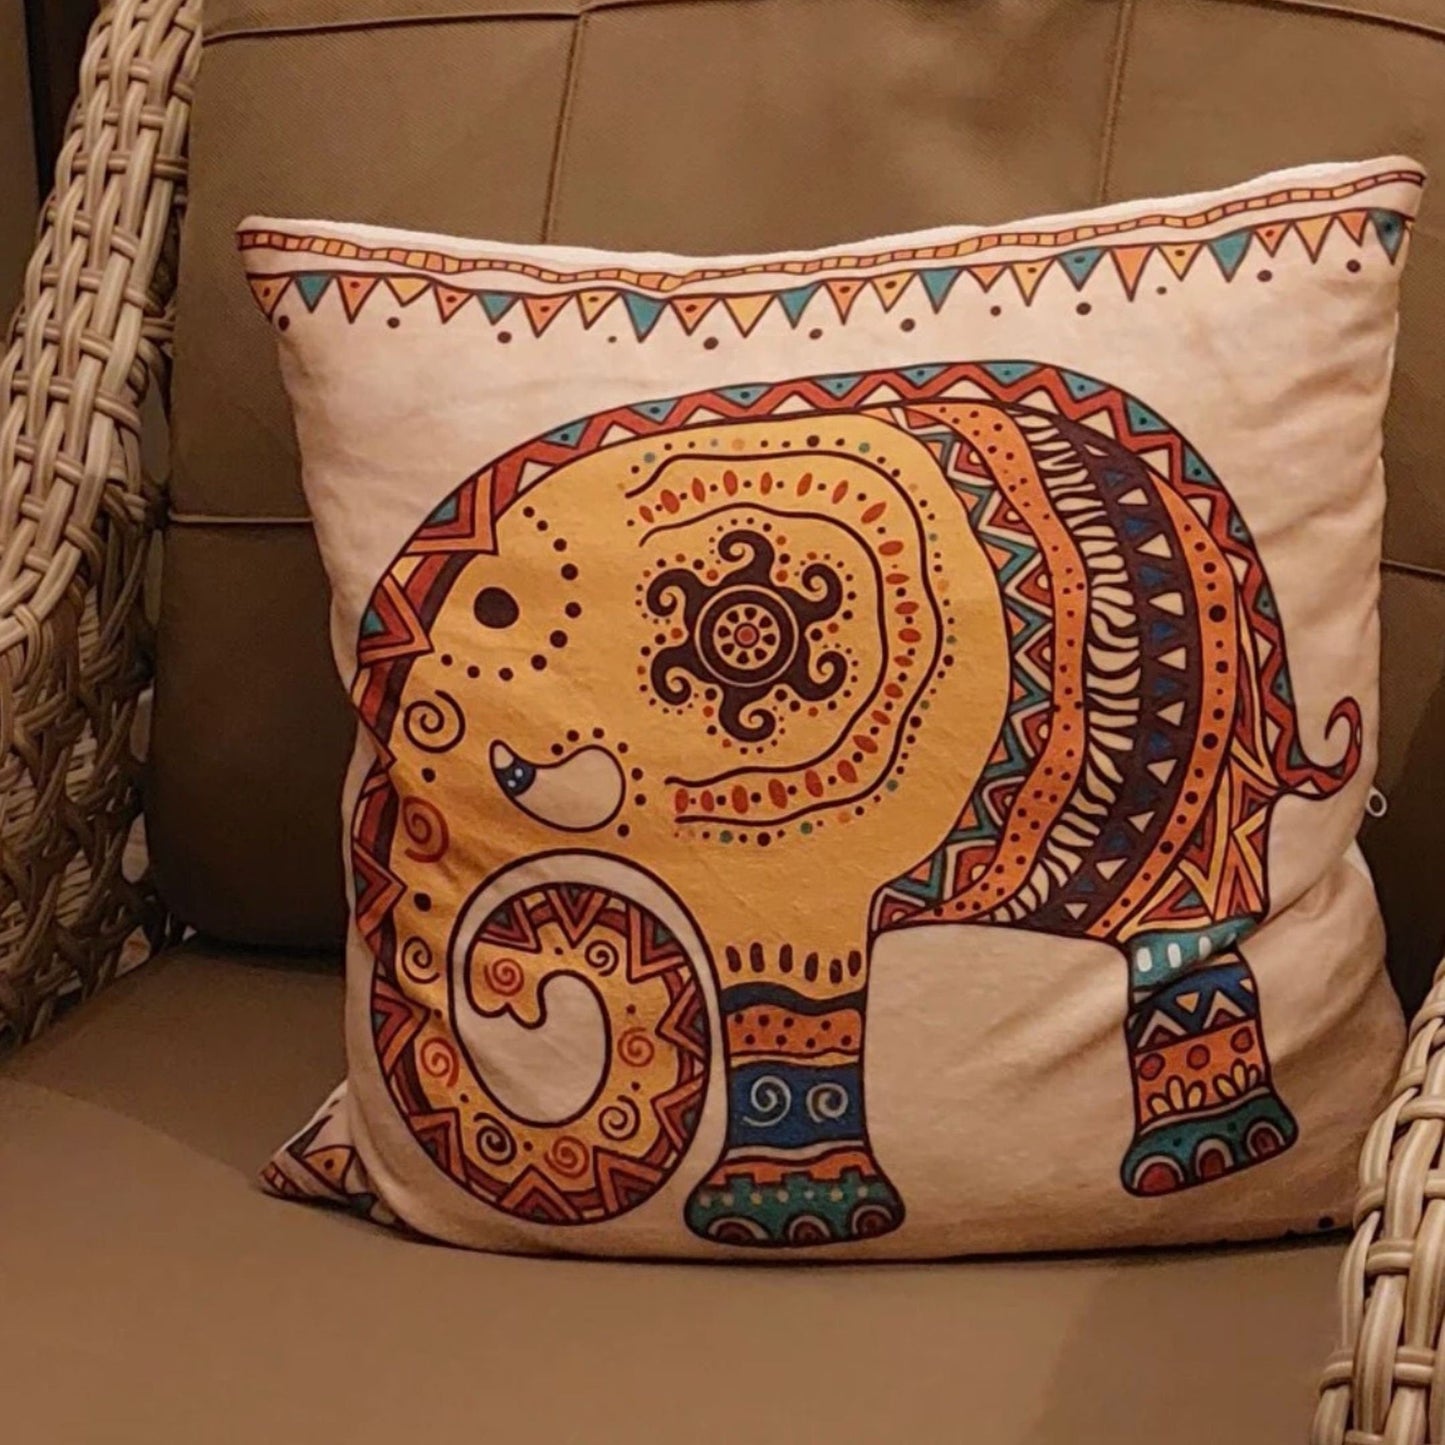 Ethnic Indian Embroidered Pillow Cover, Elephant Themed Home Decor, Elephant Pattern 3D Digital Printed Cushion Cover - 43x43 - Babila Home